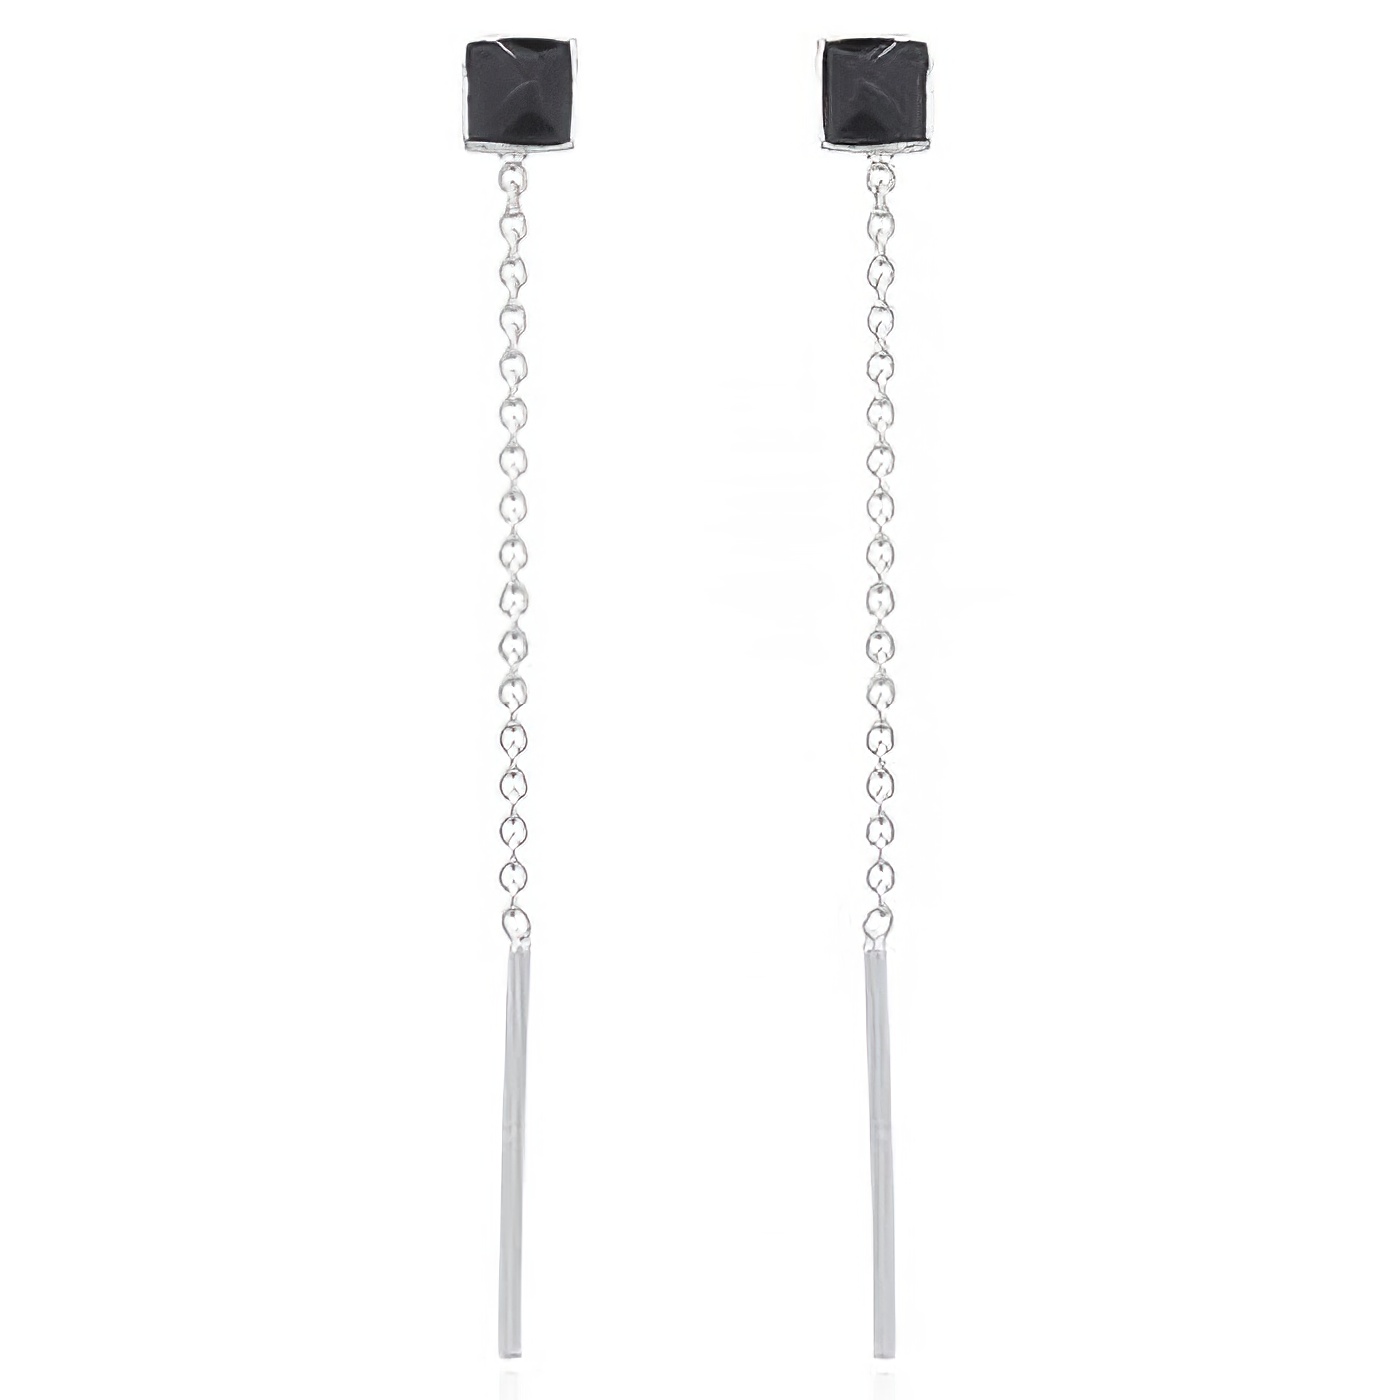 Reconstituted Stone Black Square 925 Silver Threader Earrings by BeYindi 